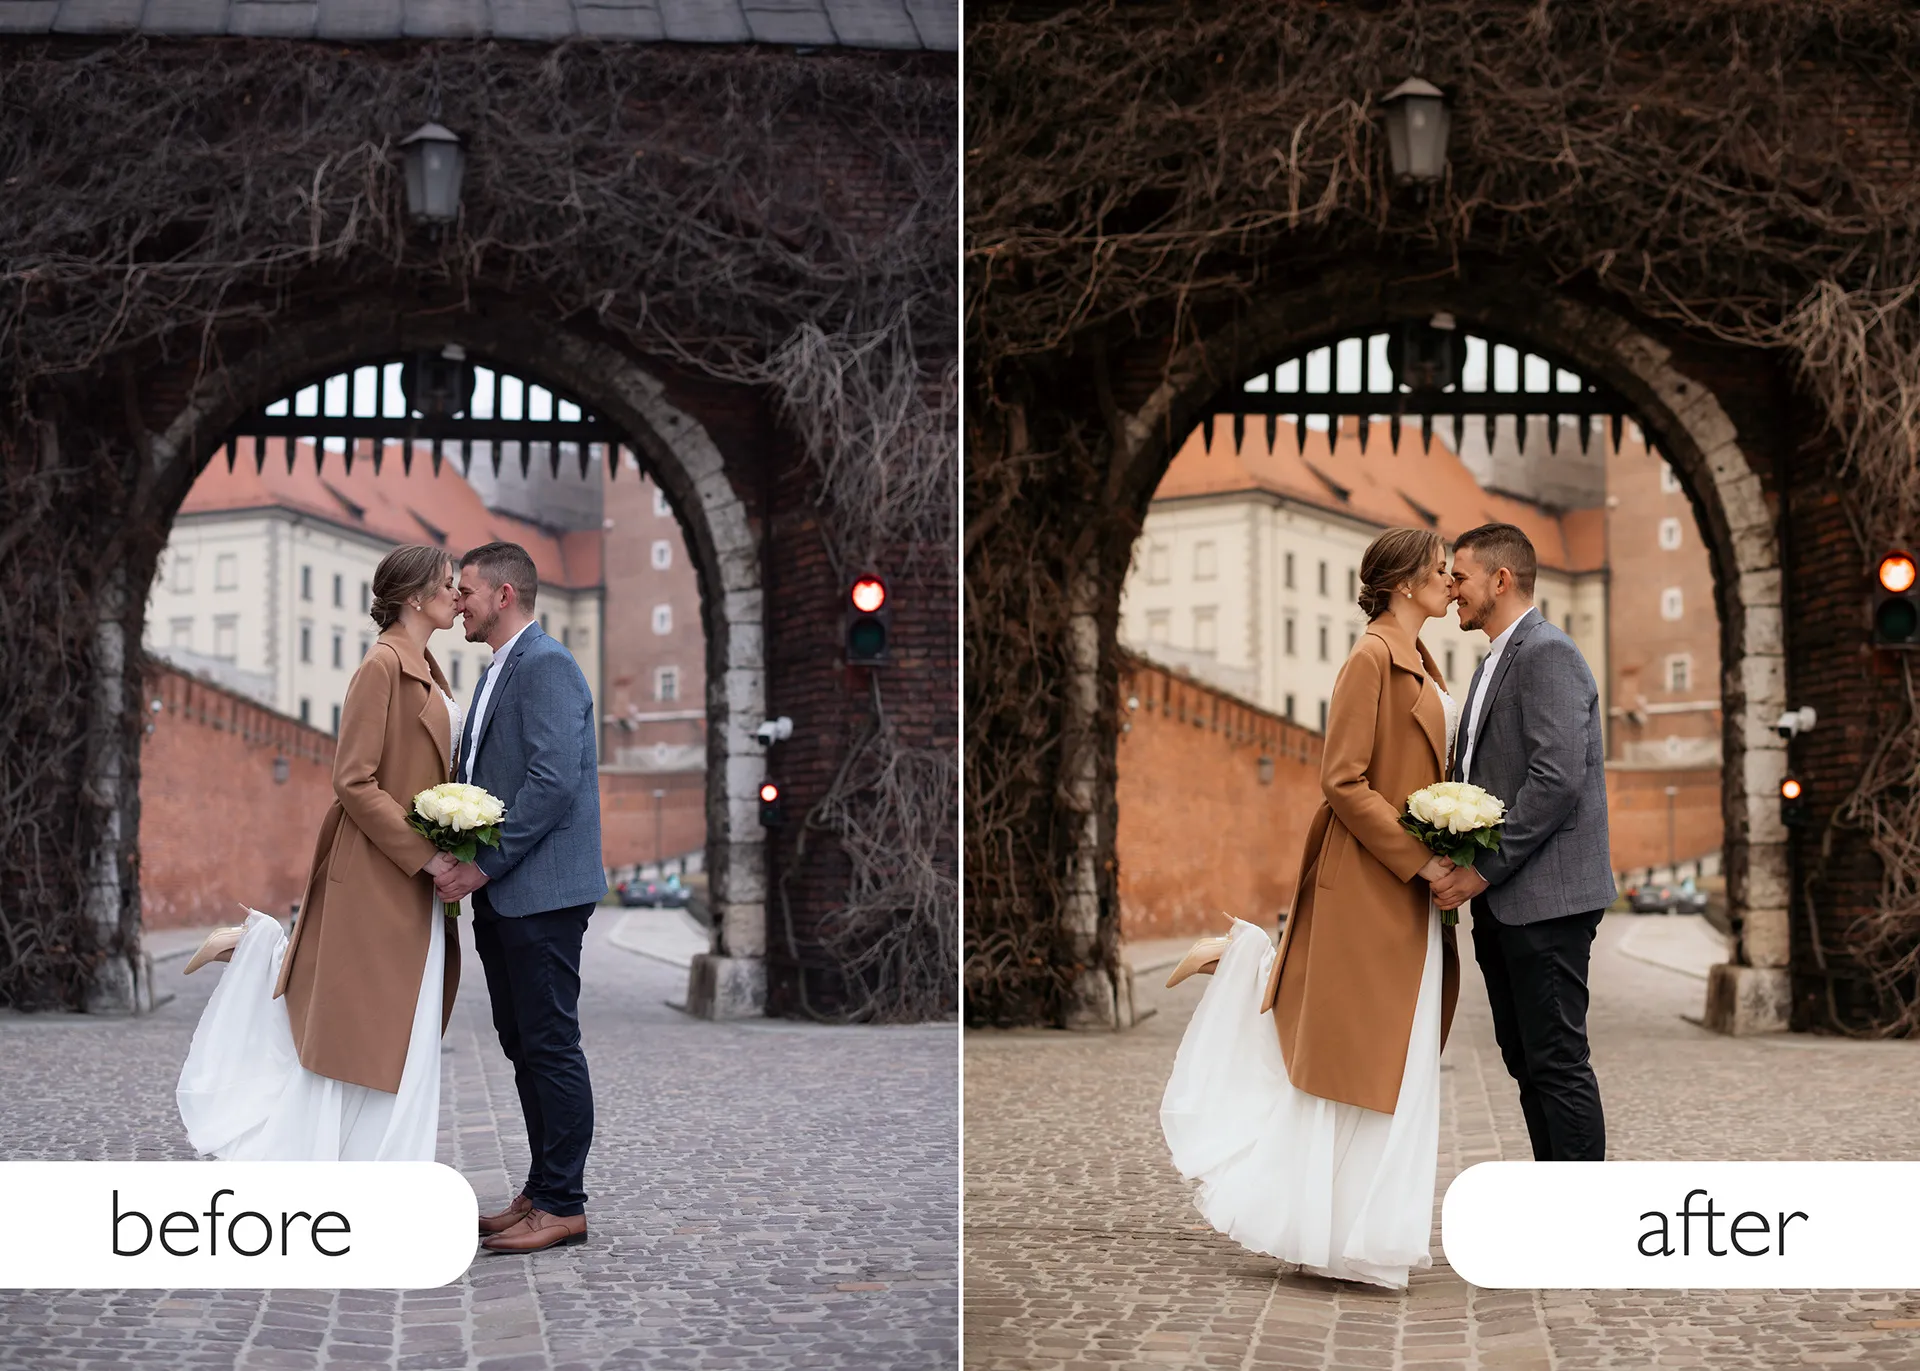 Color Correction - Post Production Services for Wedding Photographers